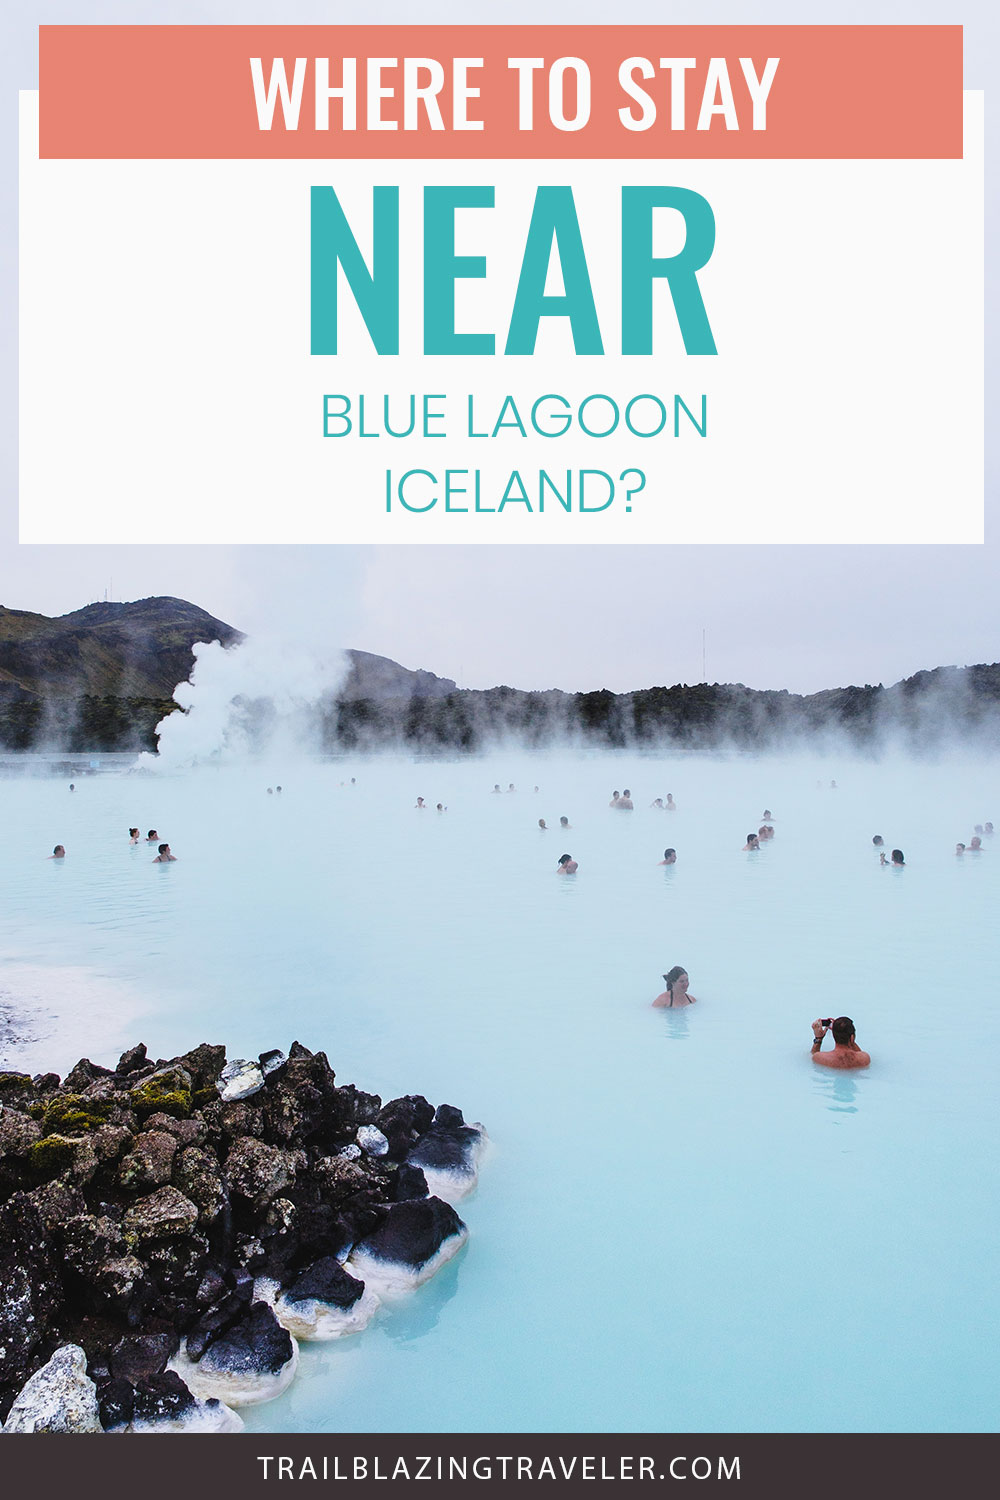 Where To Stay Near Blue Lagoon Iceland?